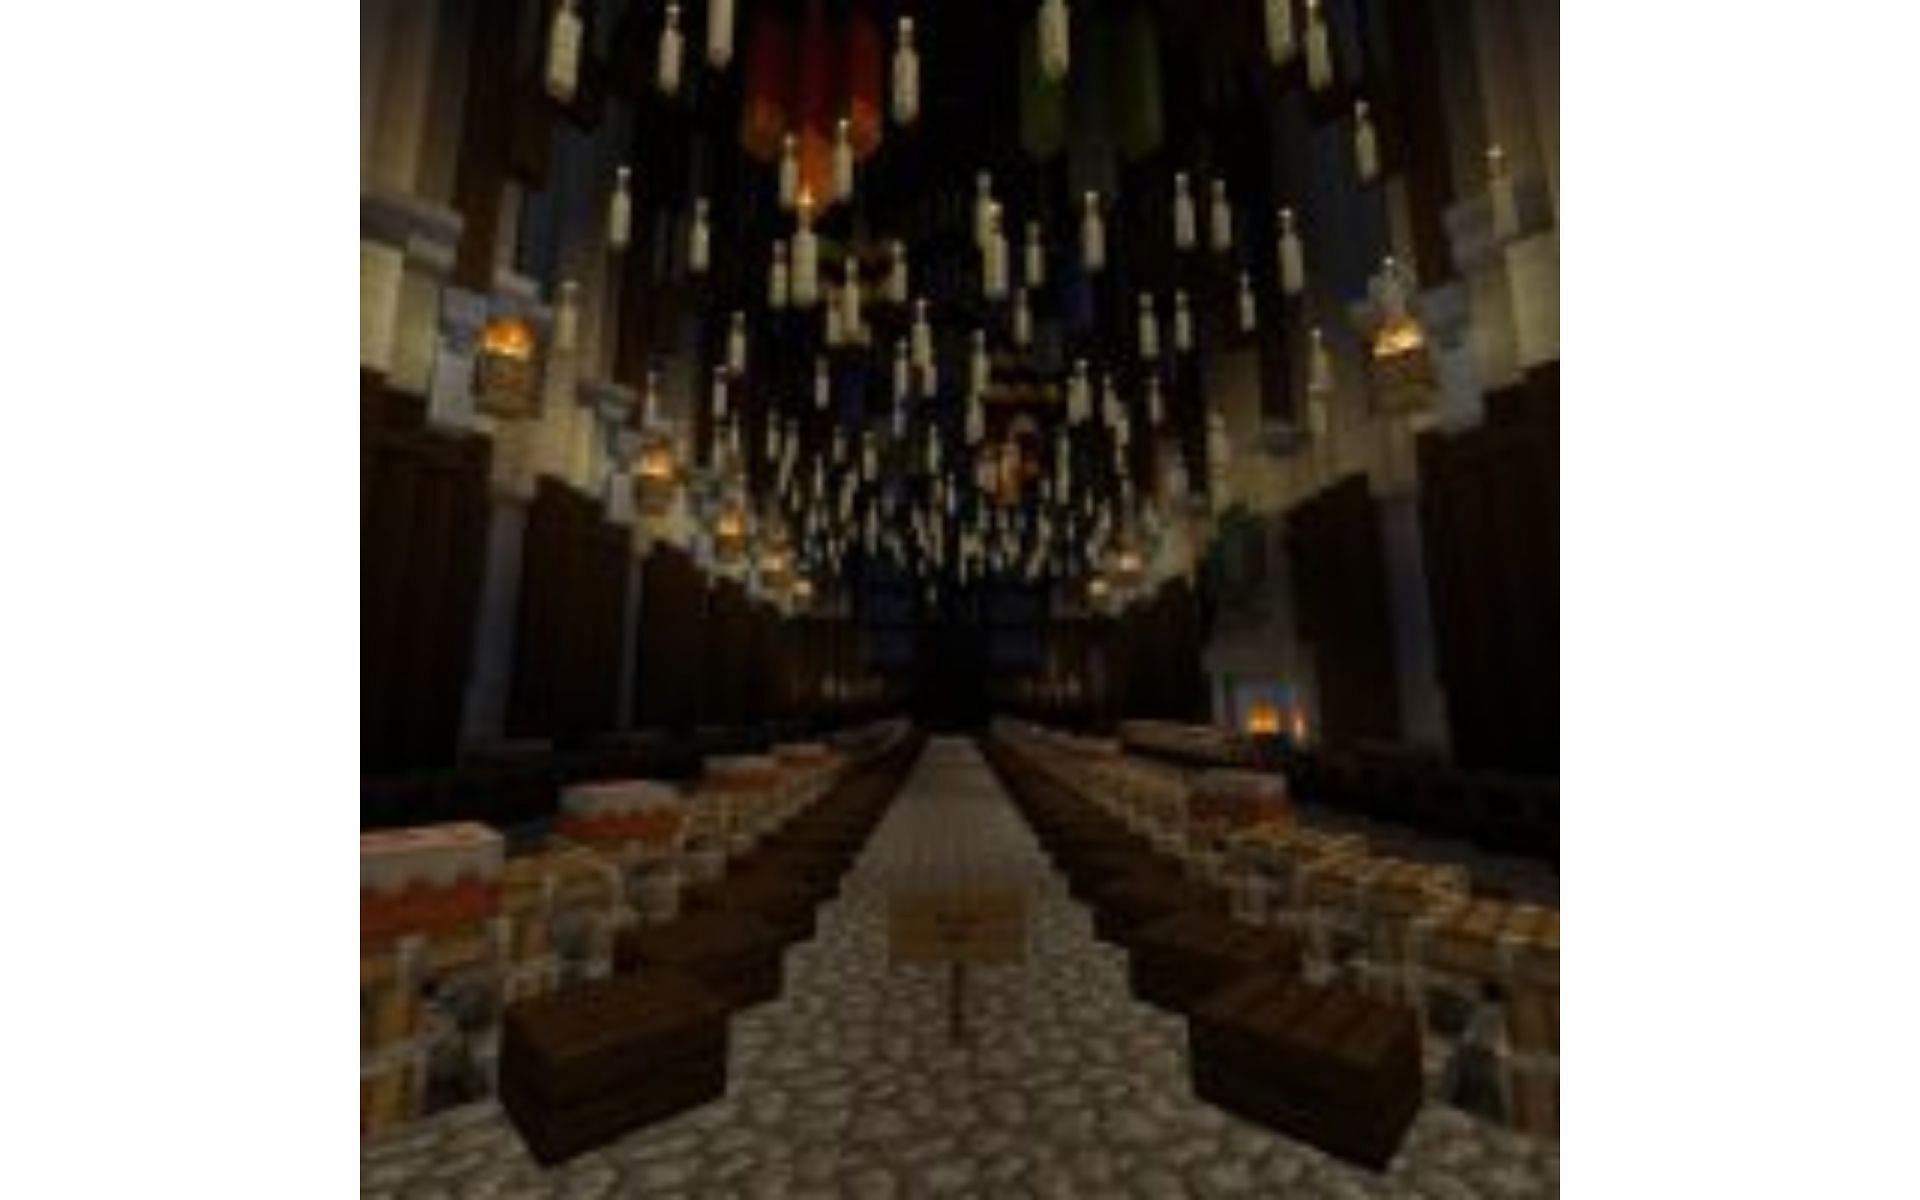 Hogwarts hall with candles on the ceiling (Image via MCPE Planet)